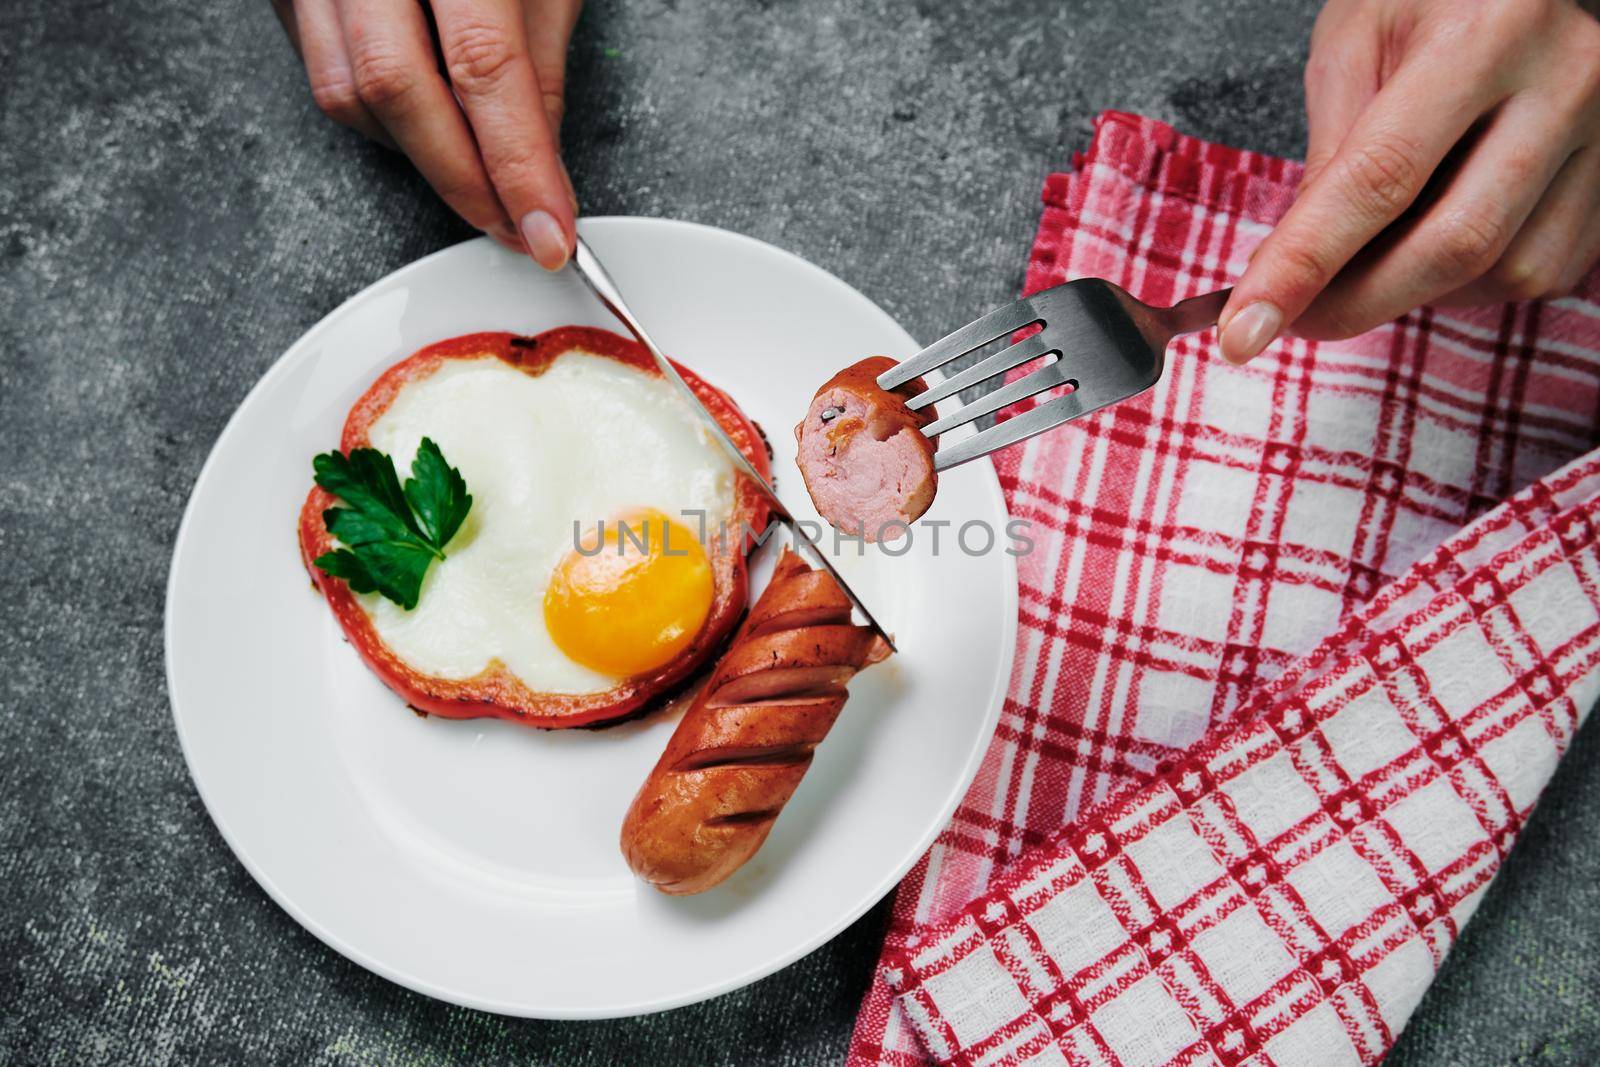 fried egg, red pepper, sausage, towel and cutlery on a dark table